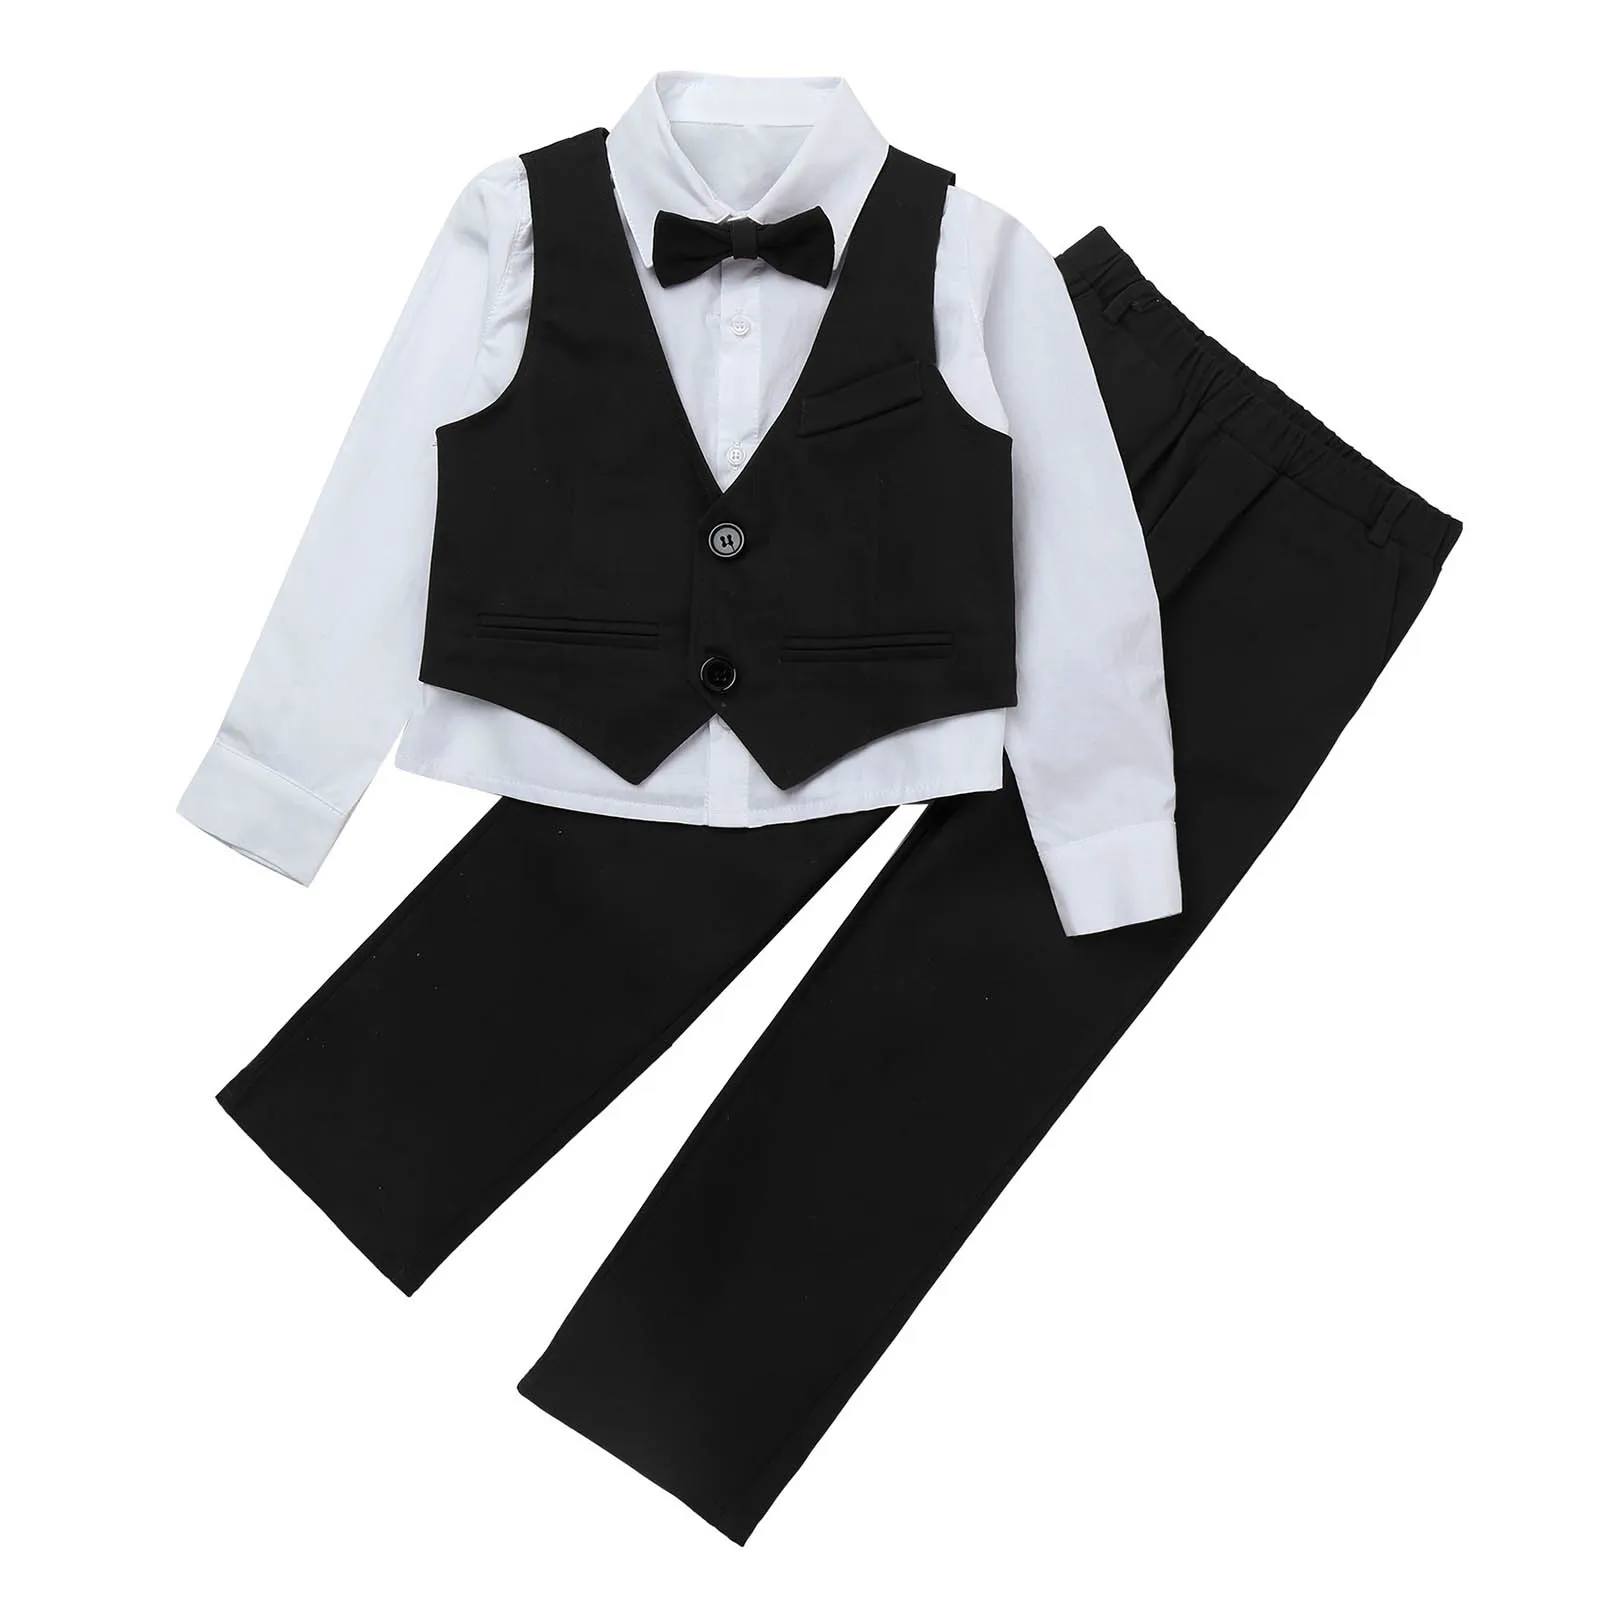 

Formal Set Fashion Kids Clothing Sets Boy Gentleman Suit Long Sleeve Bowtie Shirt +Overalls + Jacket Suit Party Tuxedo Outfits